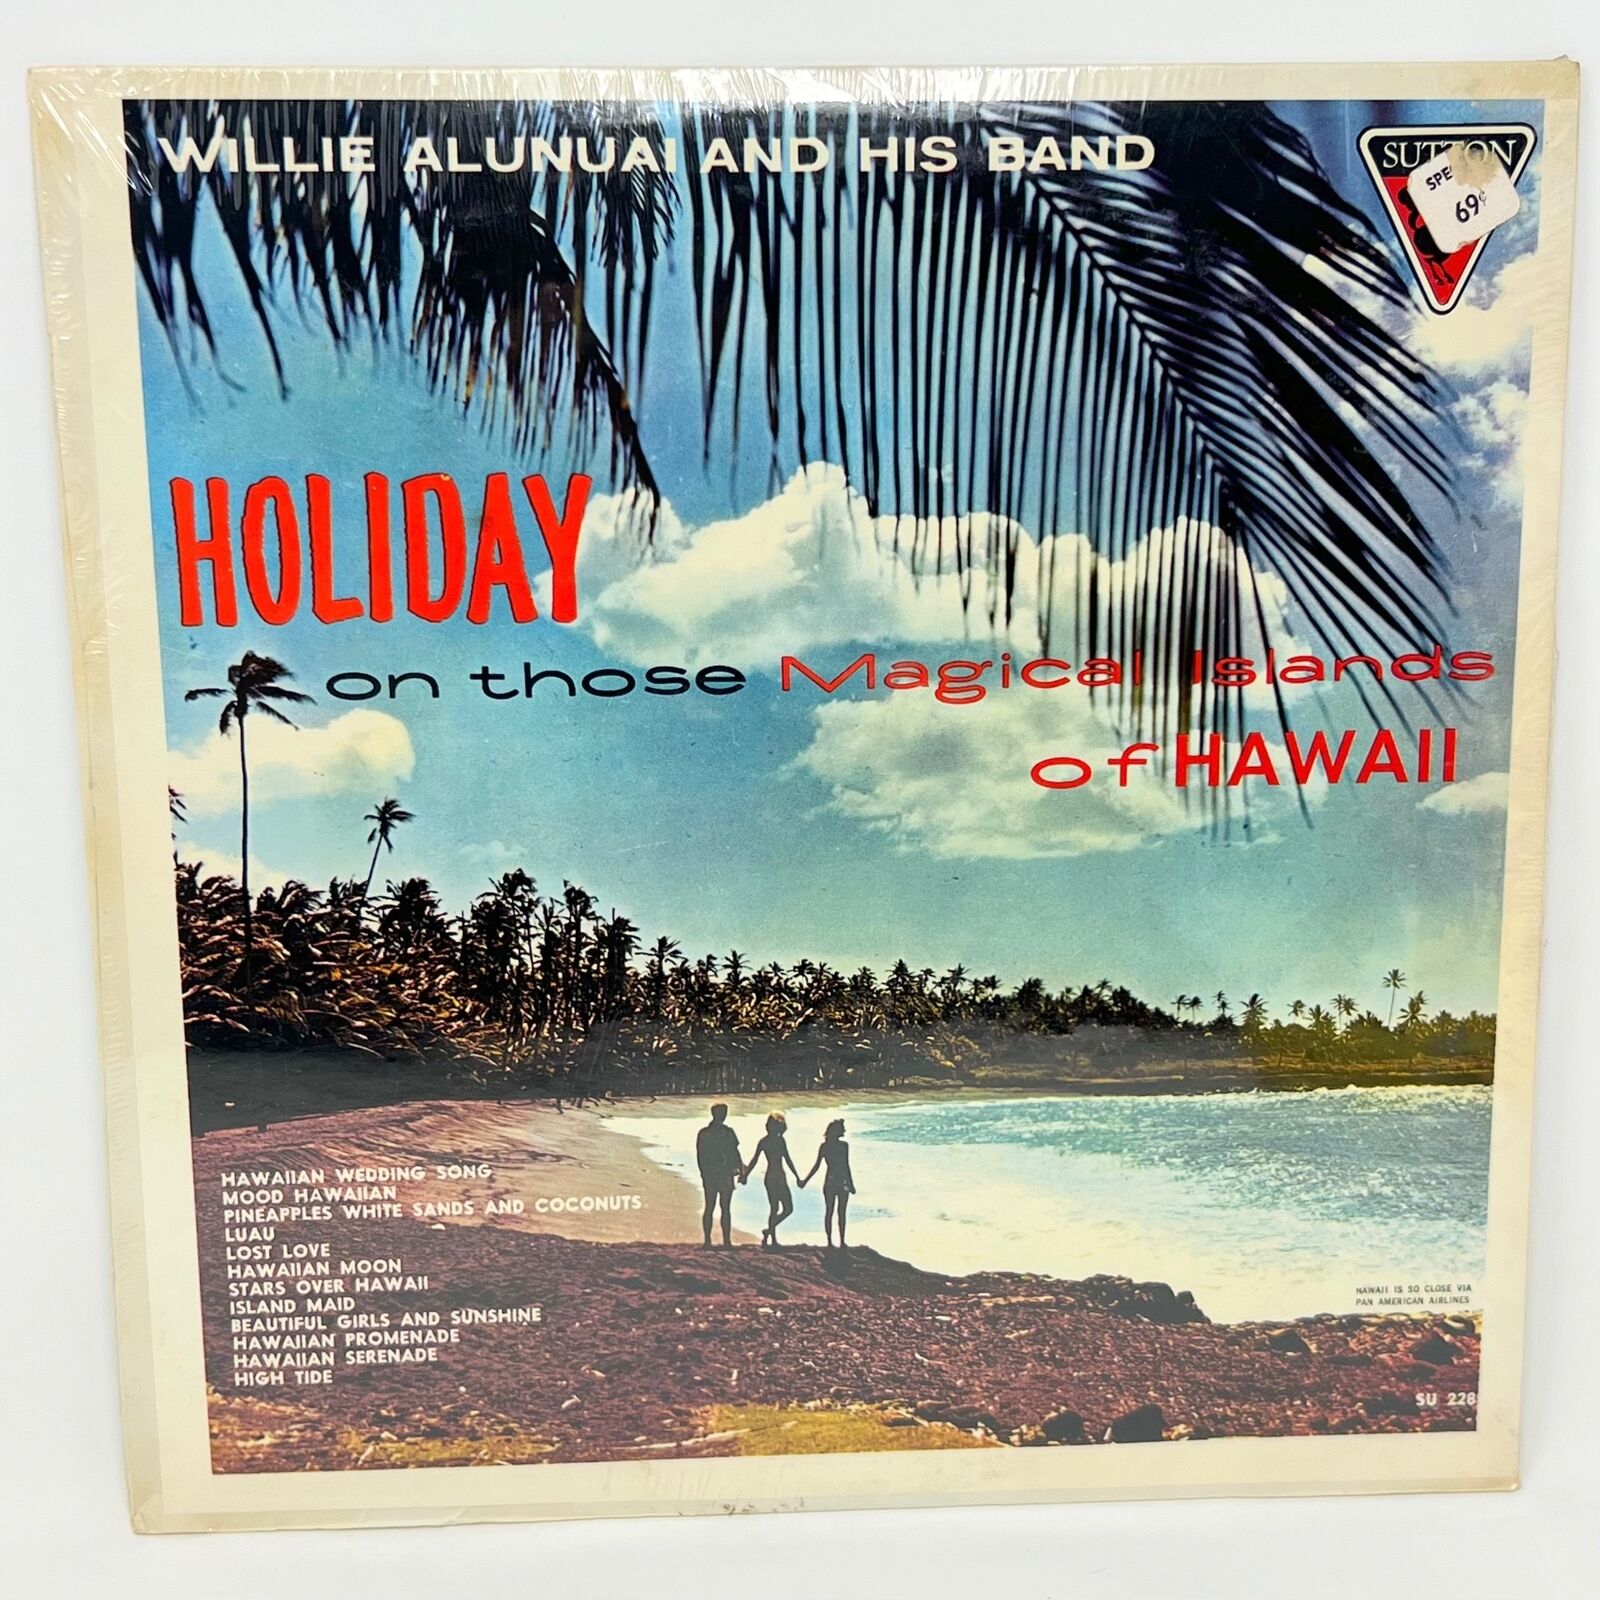 Willie Alumuai And His Band Holiday On Those Magical Islands Of Hawaii Sealed